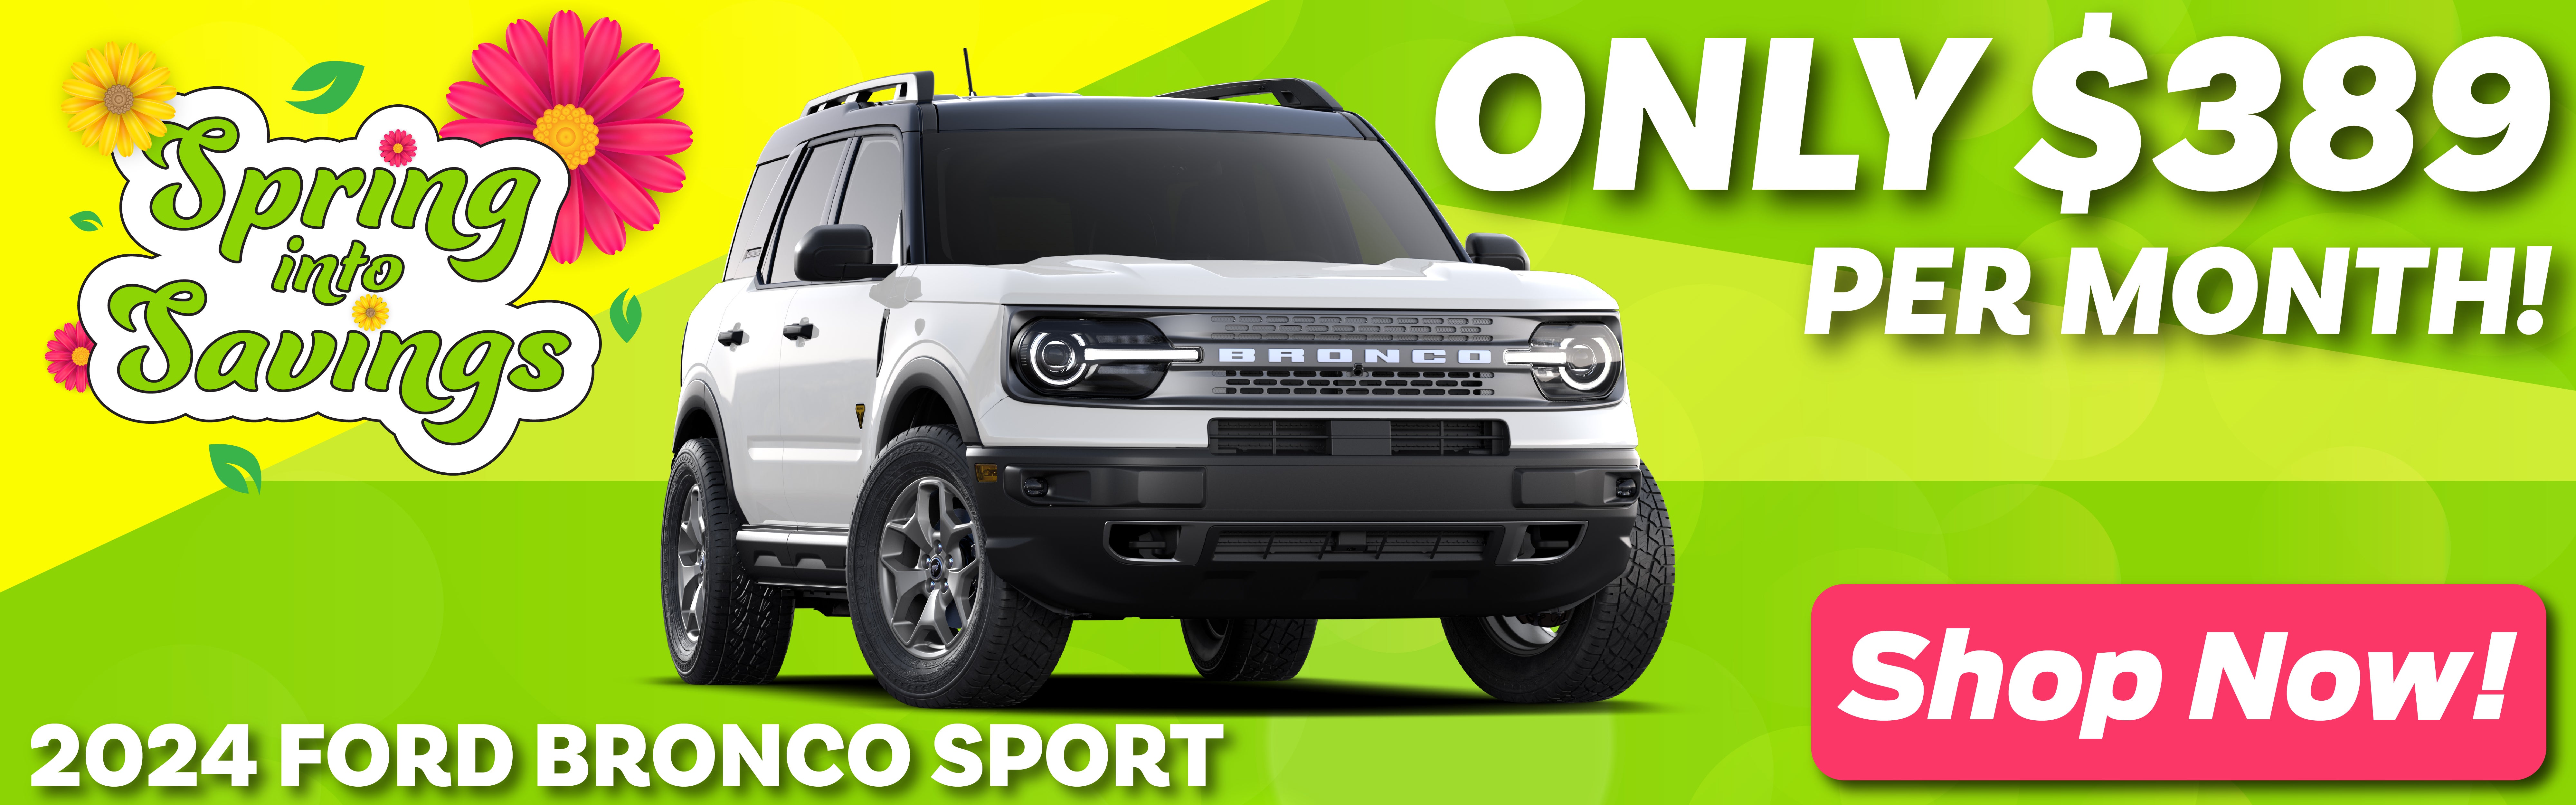 2024 Ford Bronco Sports